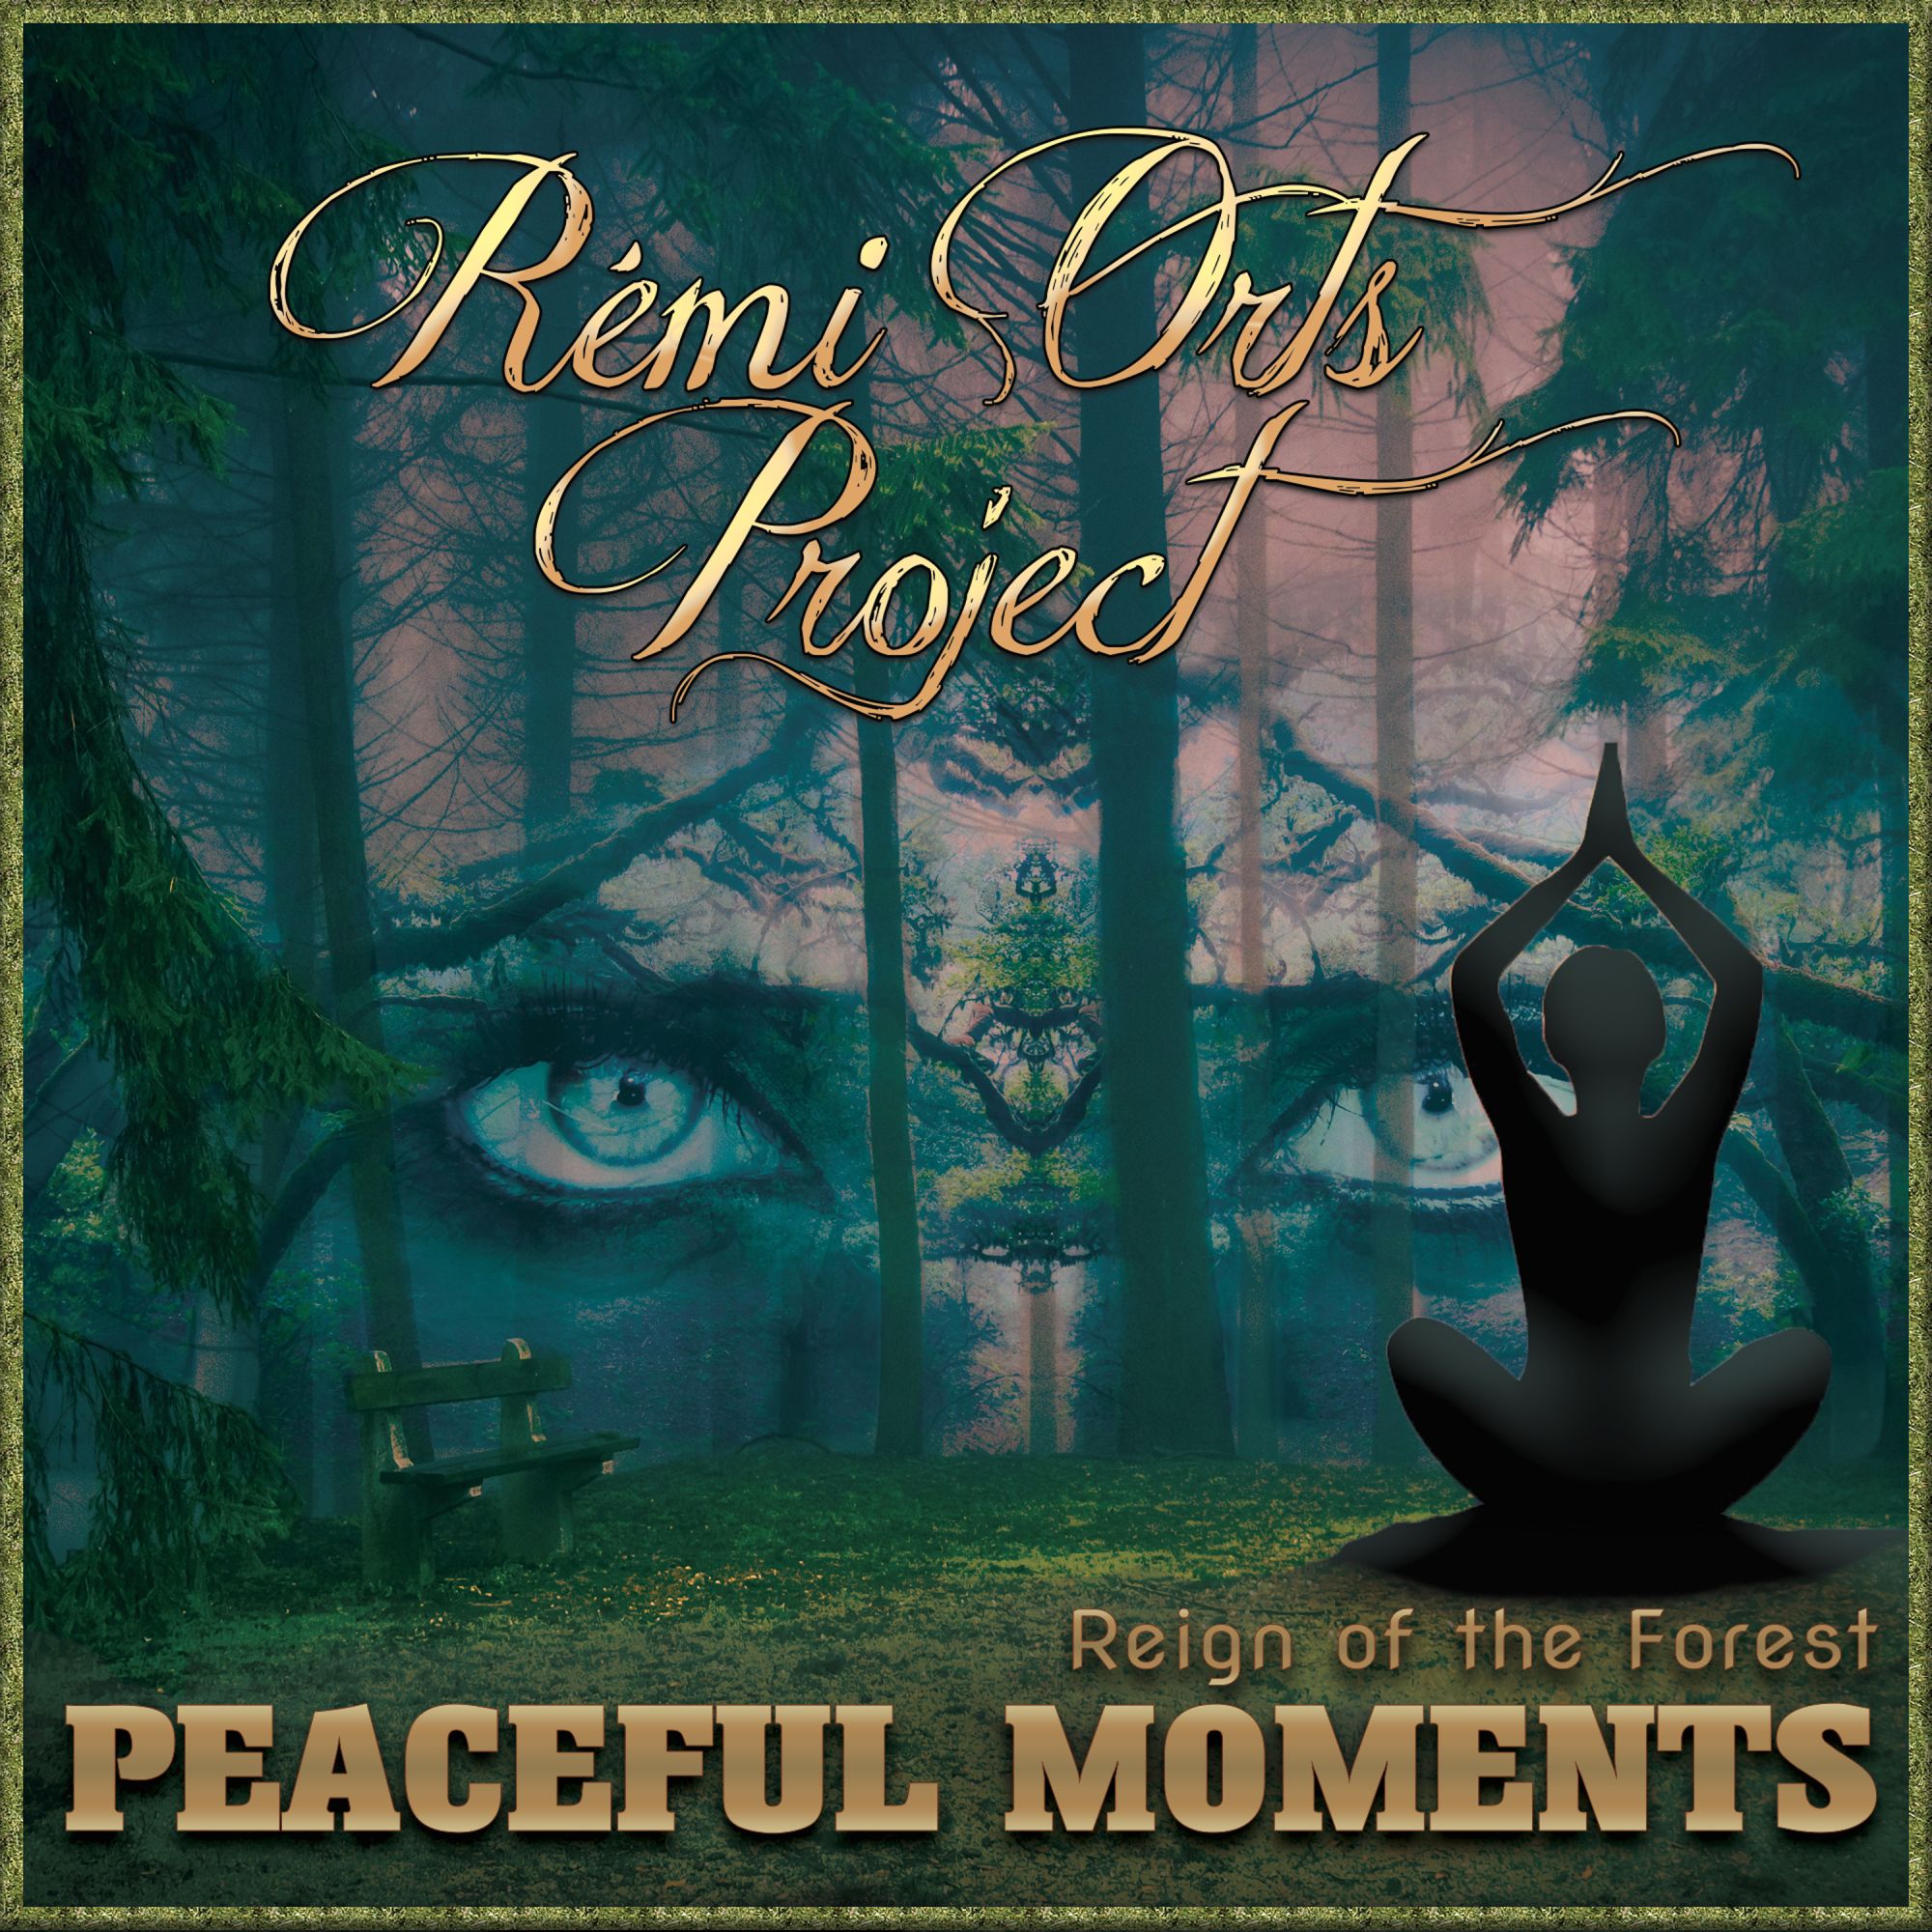 remi-orts-project-peaceful-moments-reign-of-the-forest